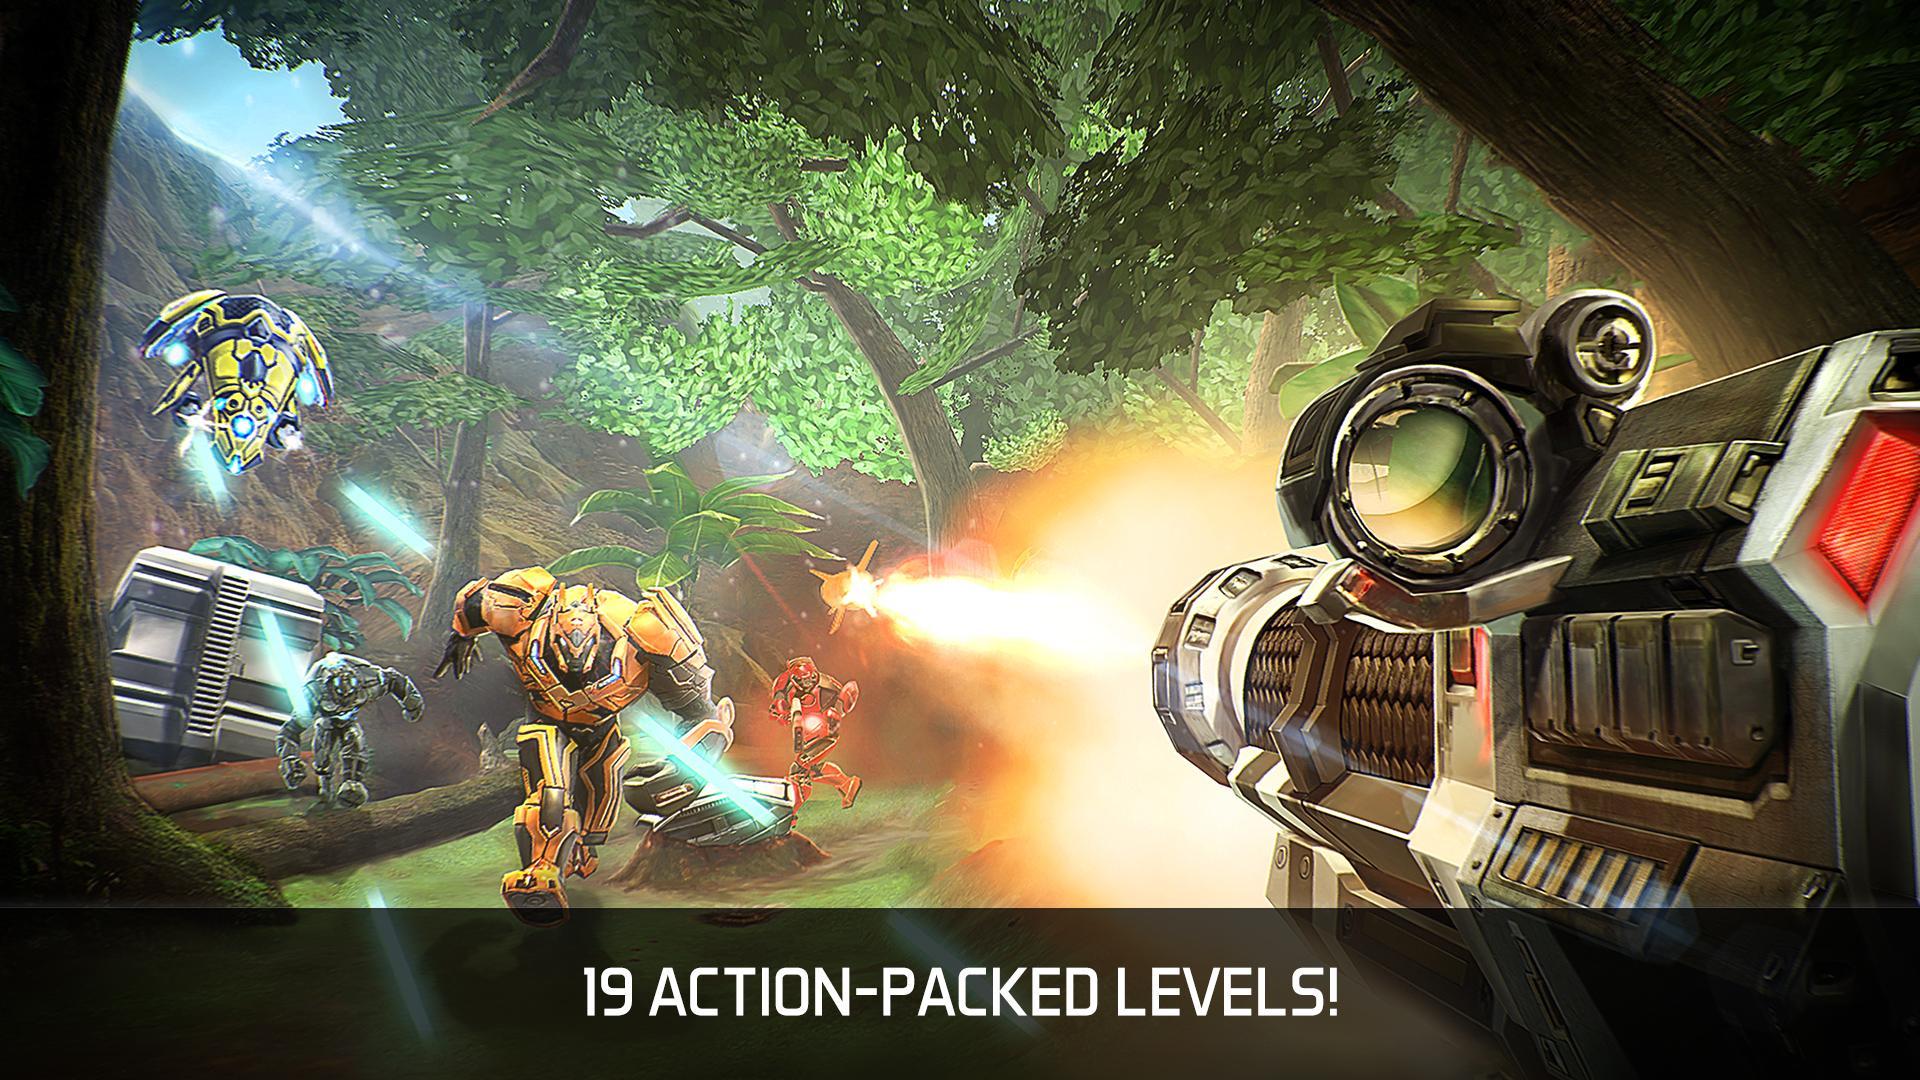 N O V A Legacy Fps Game For Android 5 8 1g Apk Download